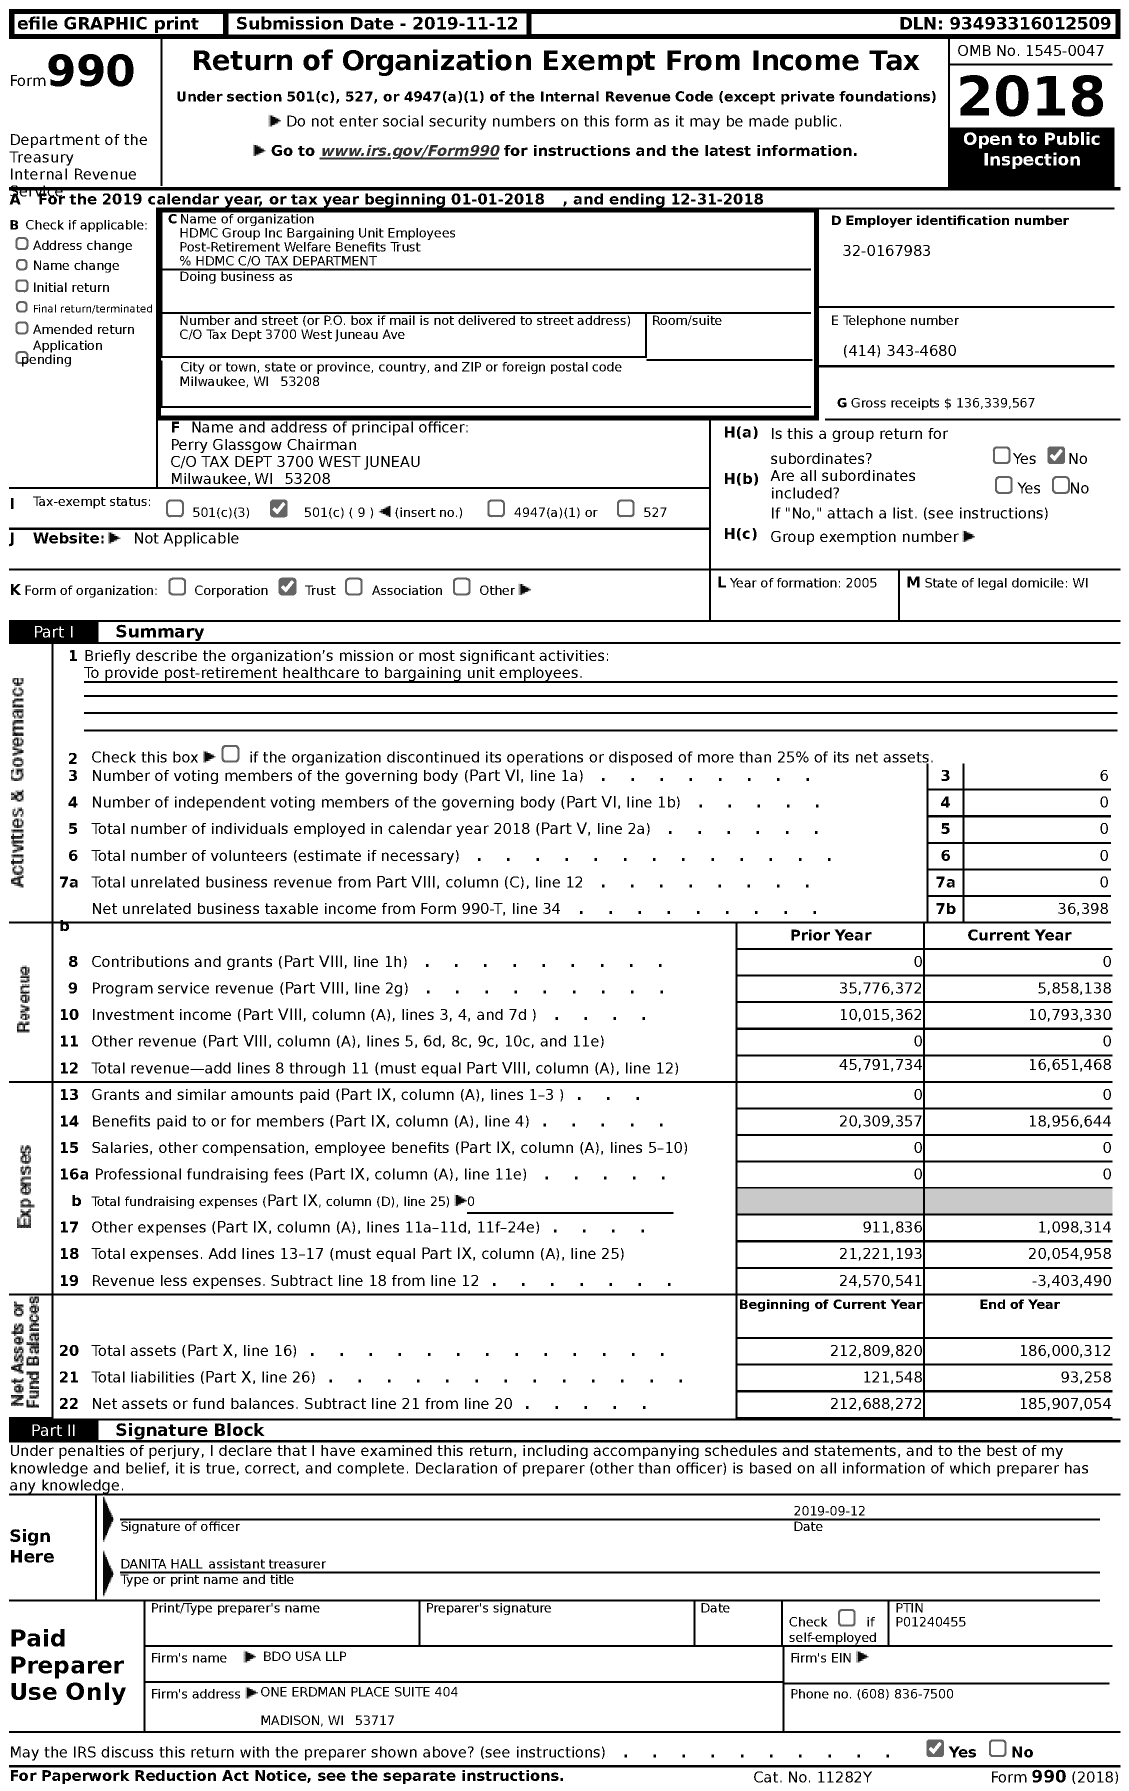 Image of first page of 2018 Form 990 for HDMC Group Inc Bargaining Unit Employees Post-Retirement Welfare Benefits Trust